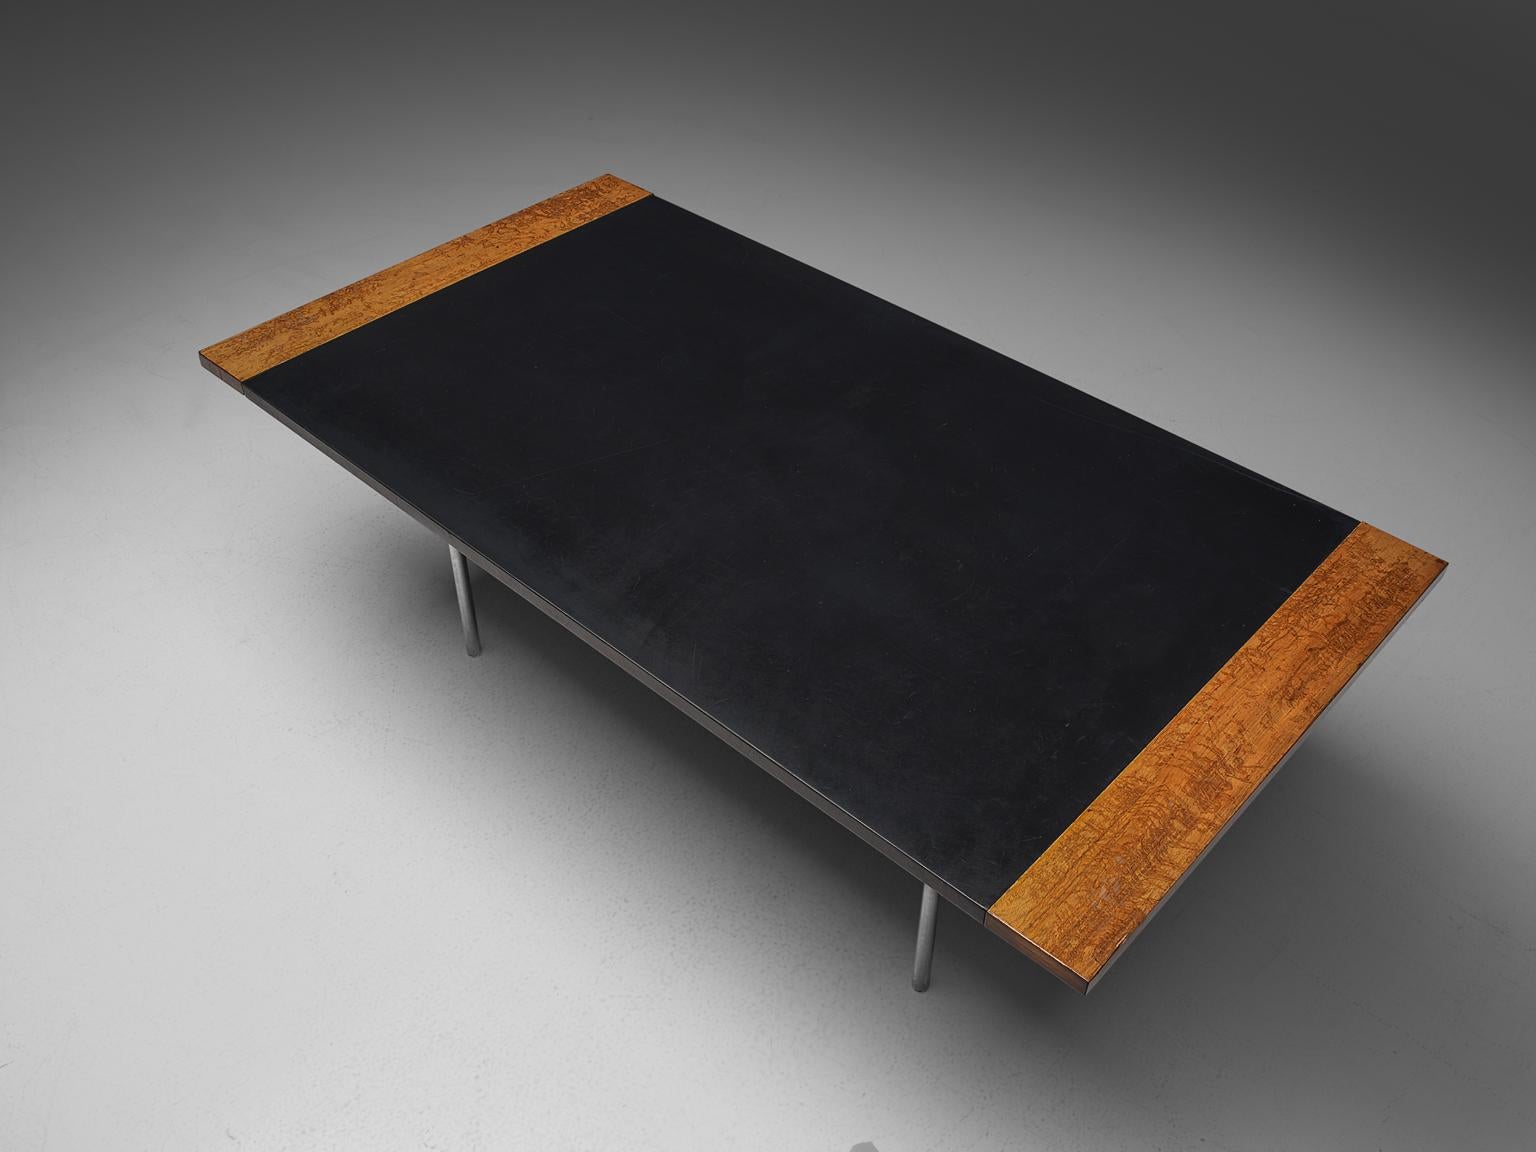 Wood Sven Ivar Dysthe Table in Rosewood and Black Leather